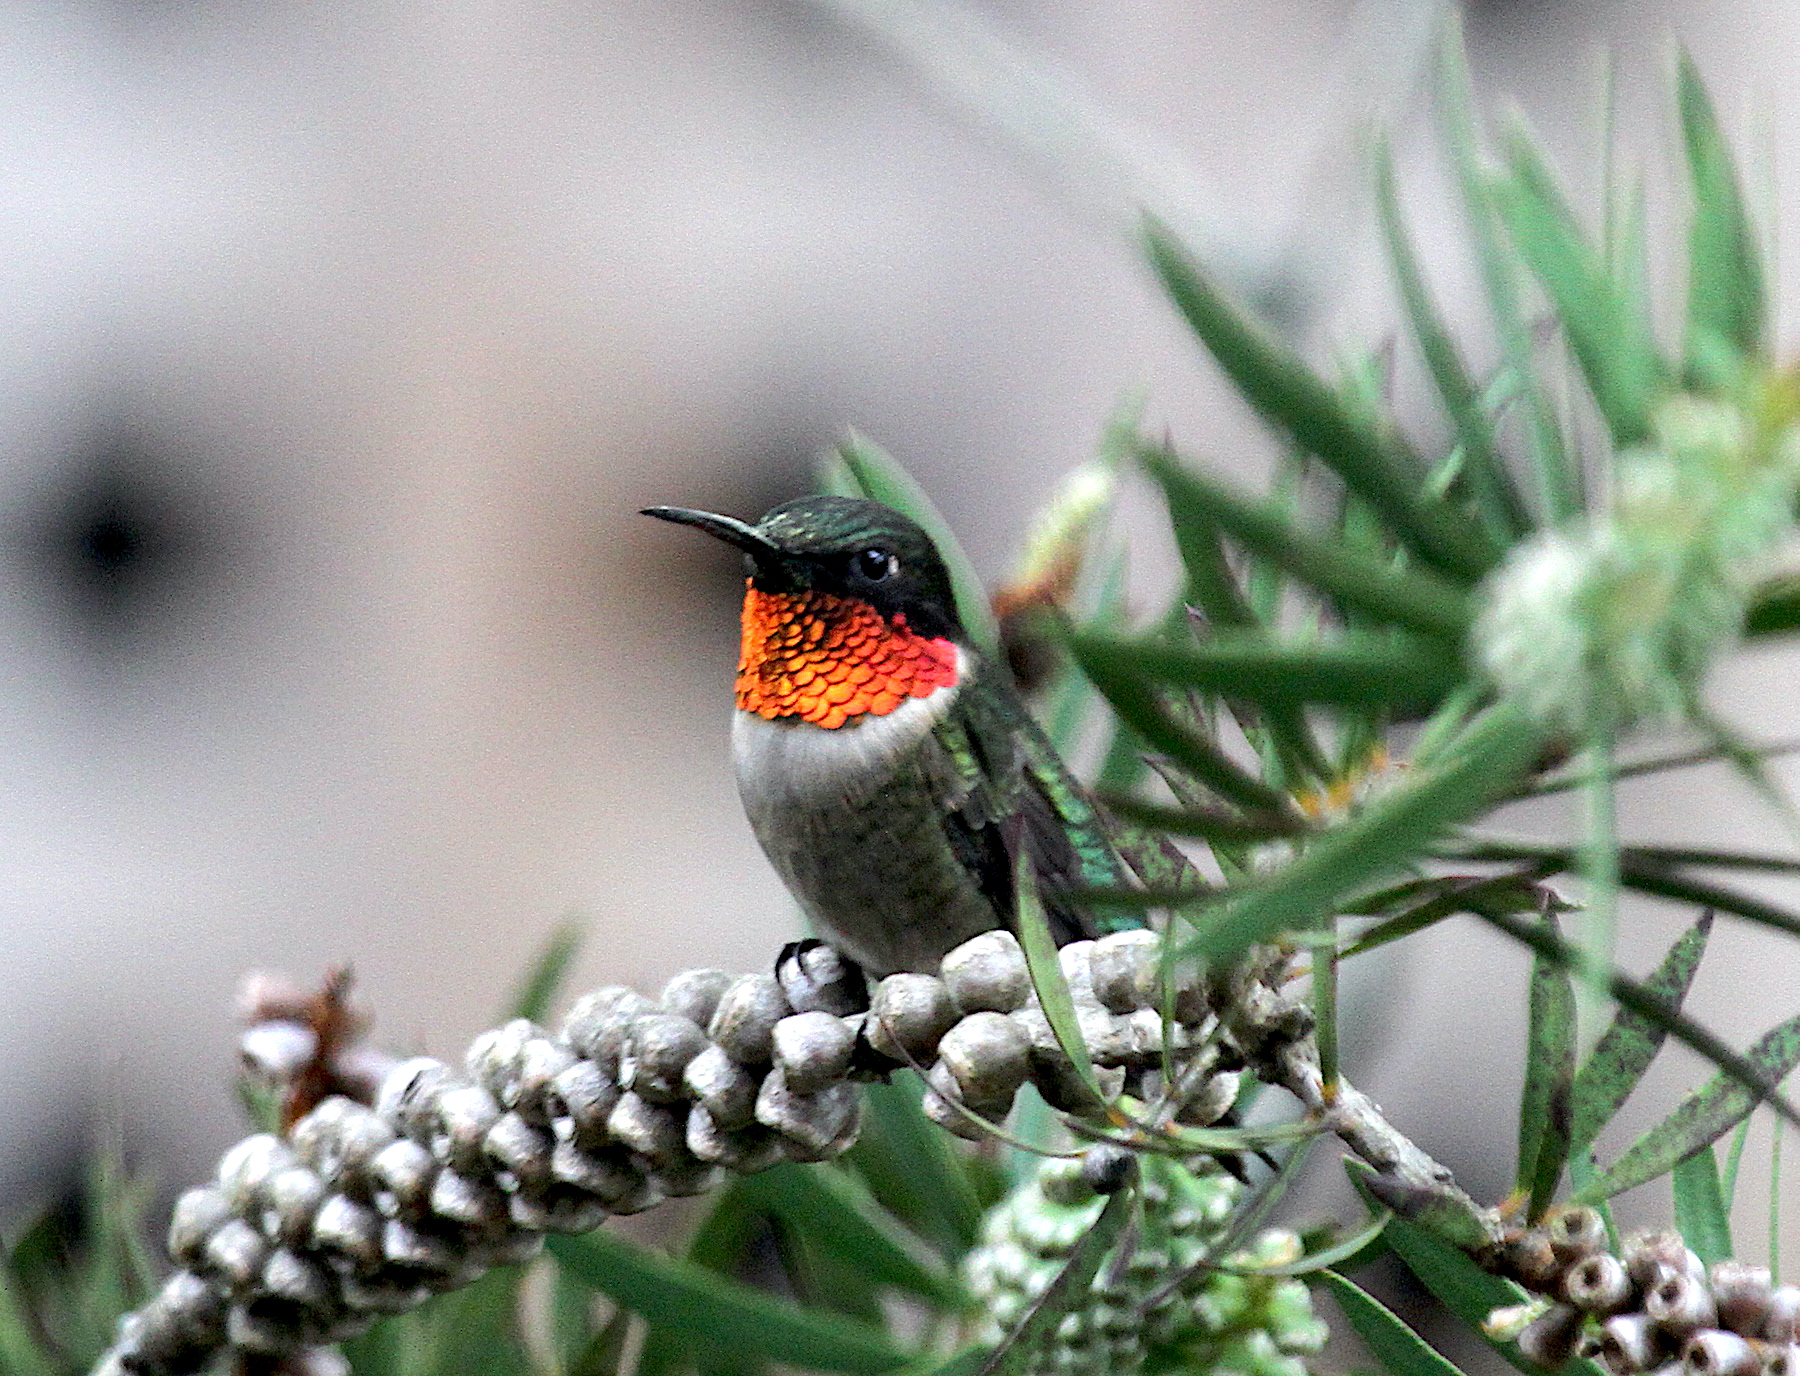 Christmas Bird Count data are showing lingering and northward movement of Ruby-throated Hummingbirds.